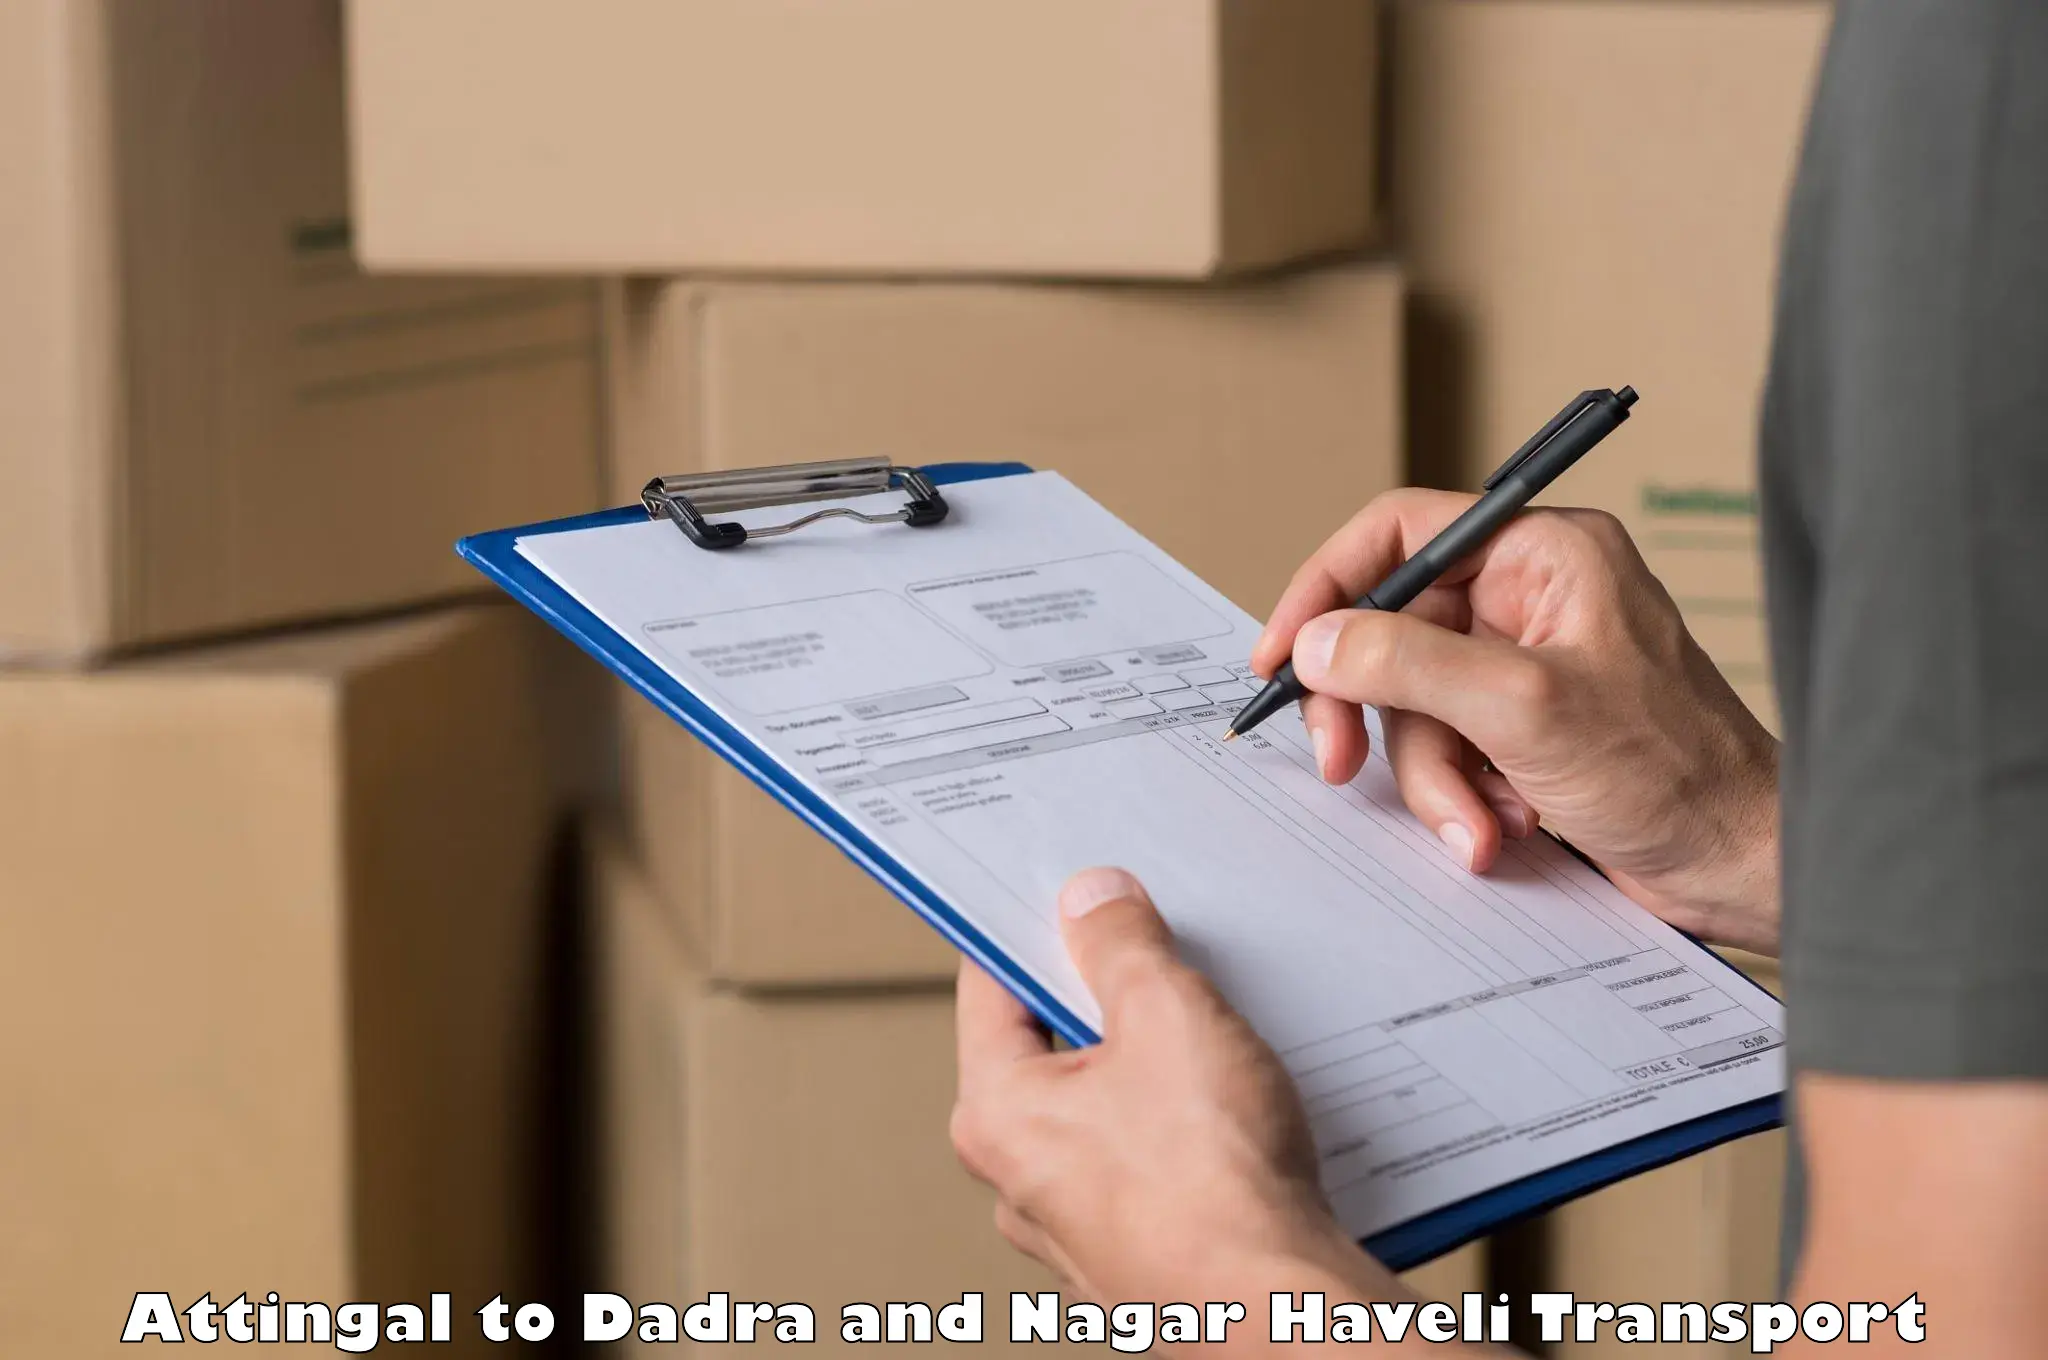 Cargo train transport services in Attingal to Dadra and Nagar Haveli